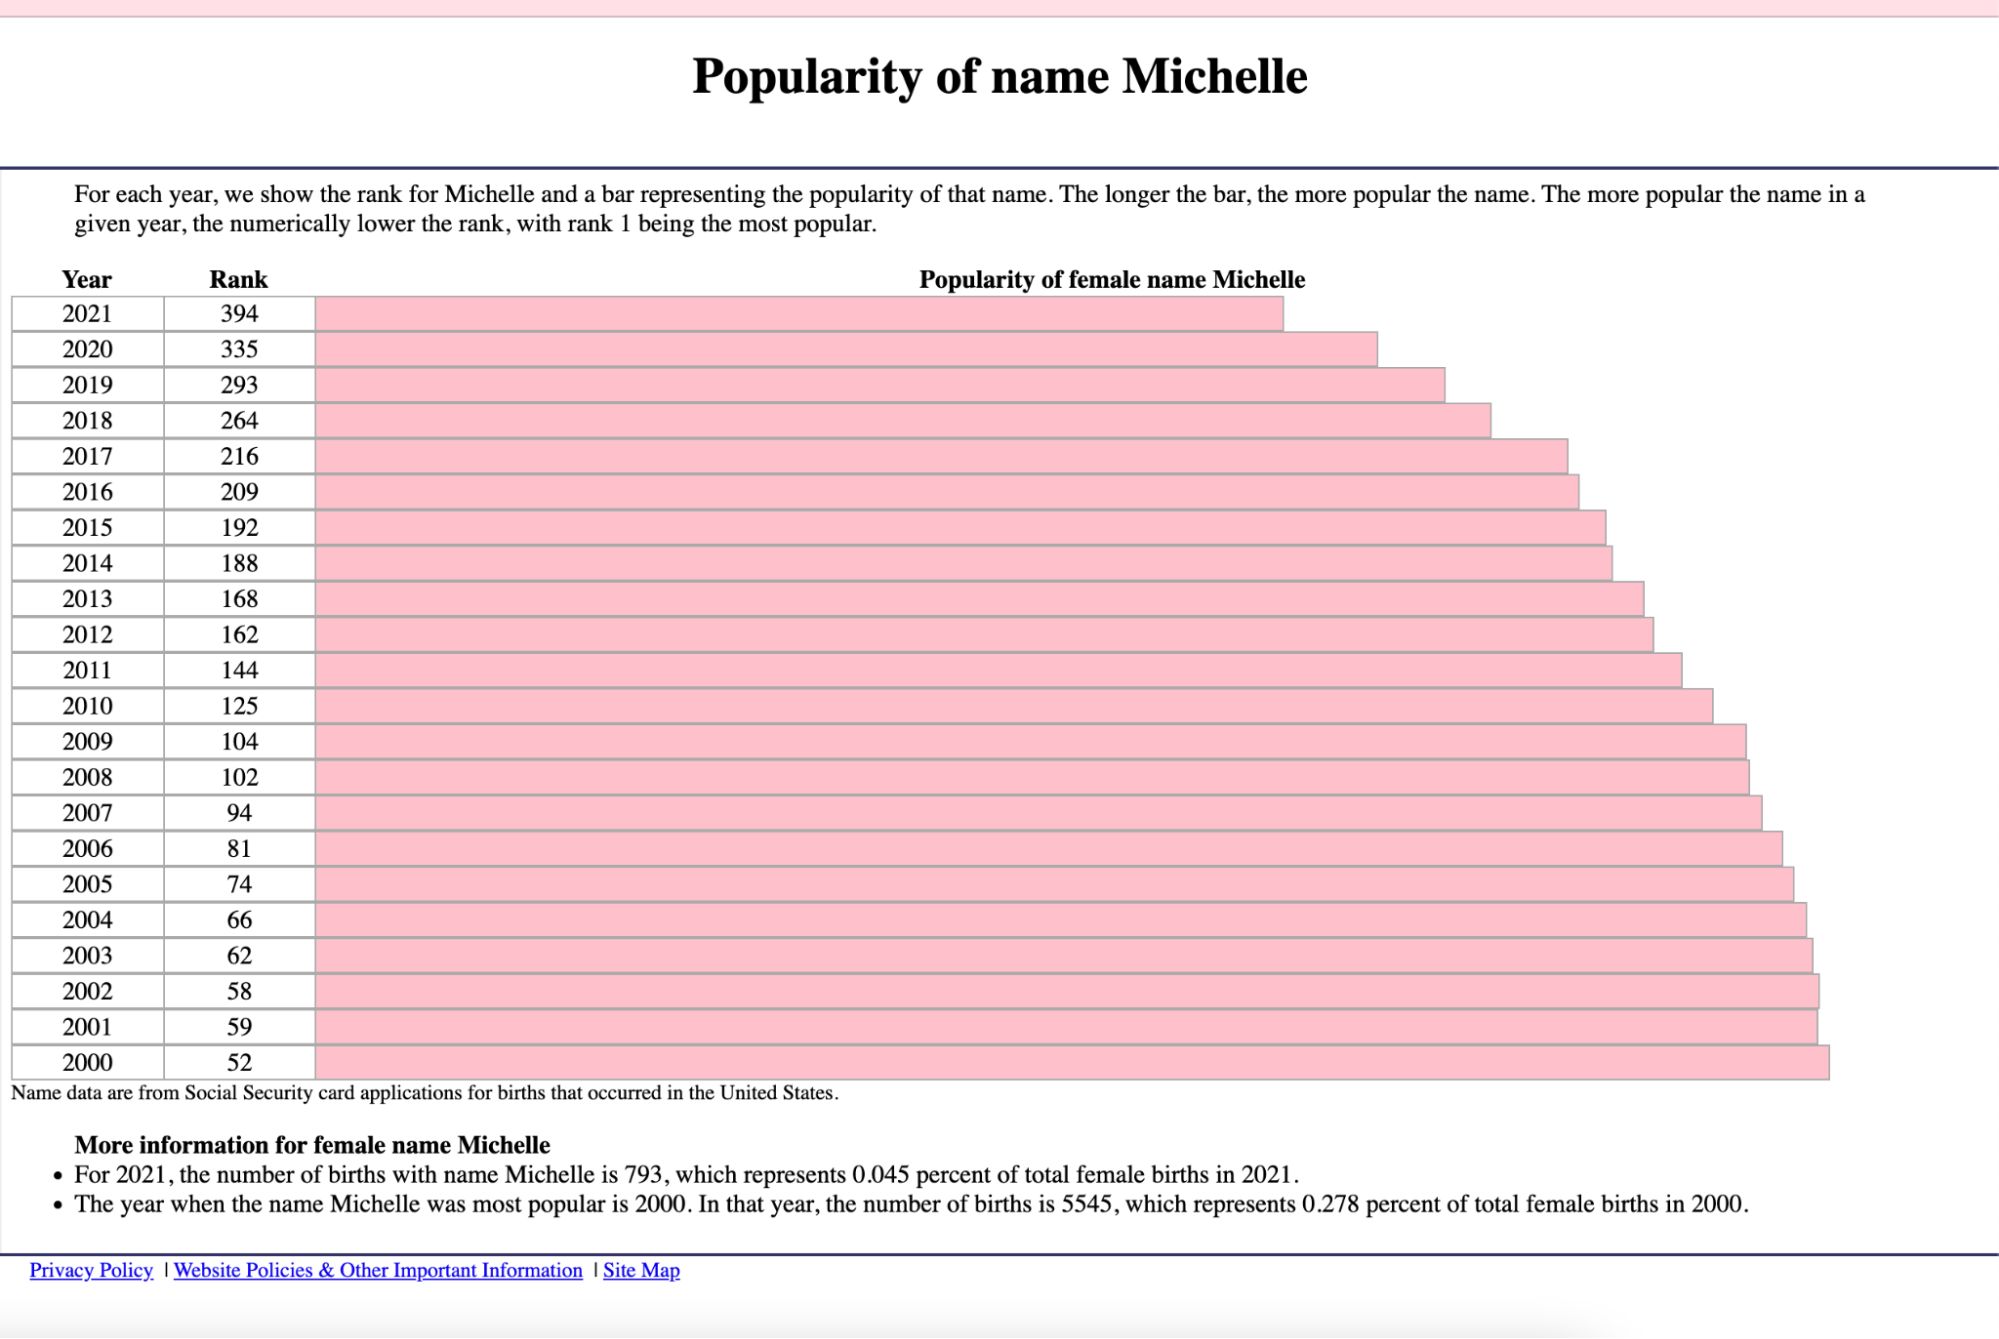 Popularity of the name Michelle